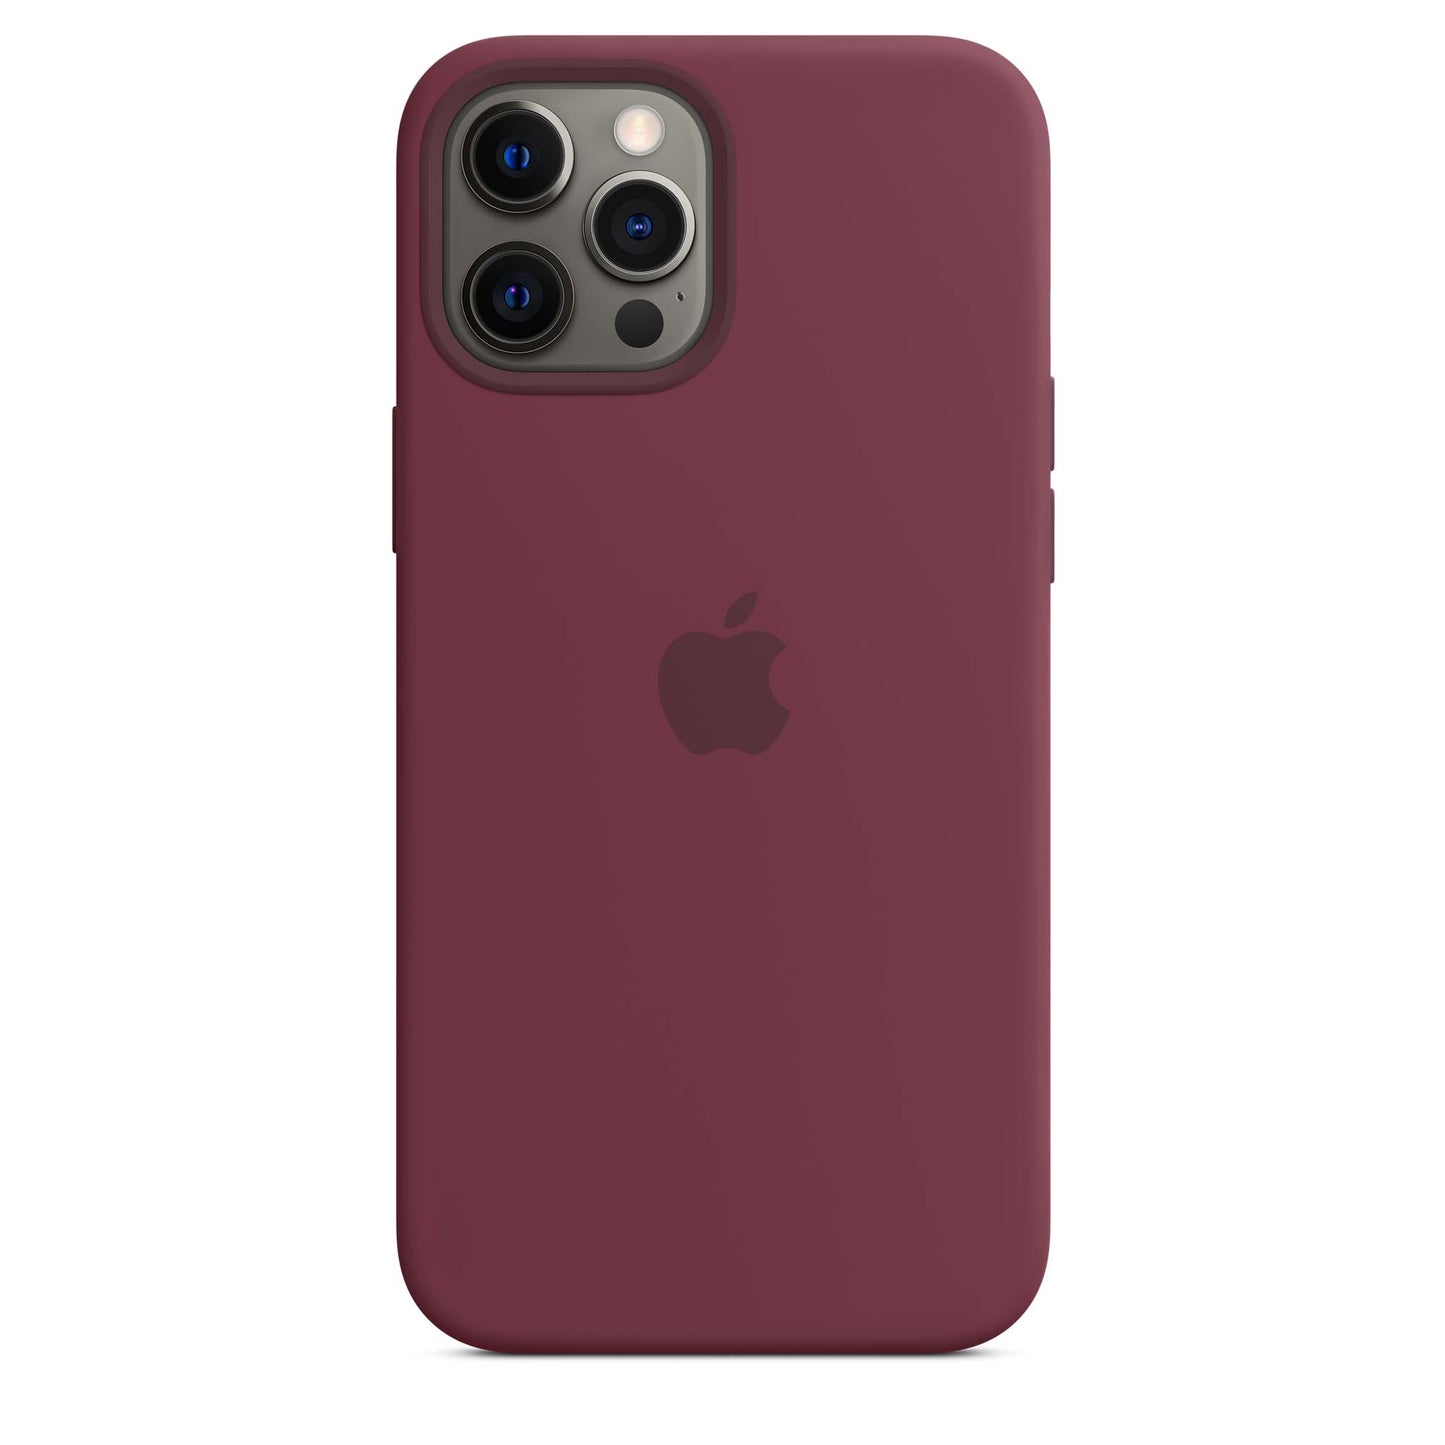 iPhone 12 Pro Max Silicone Case with MagSafe - Plum